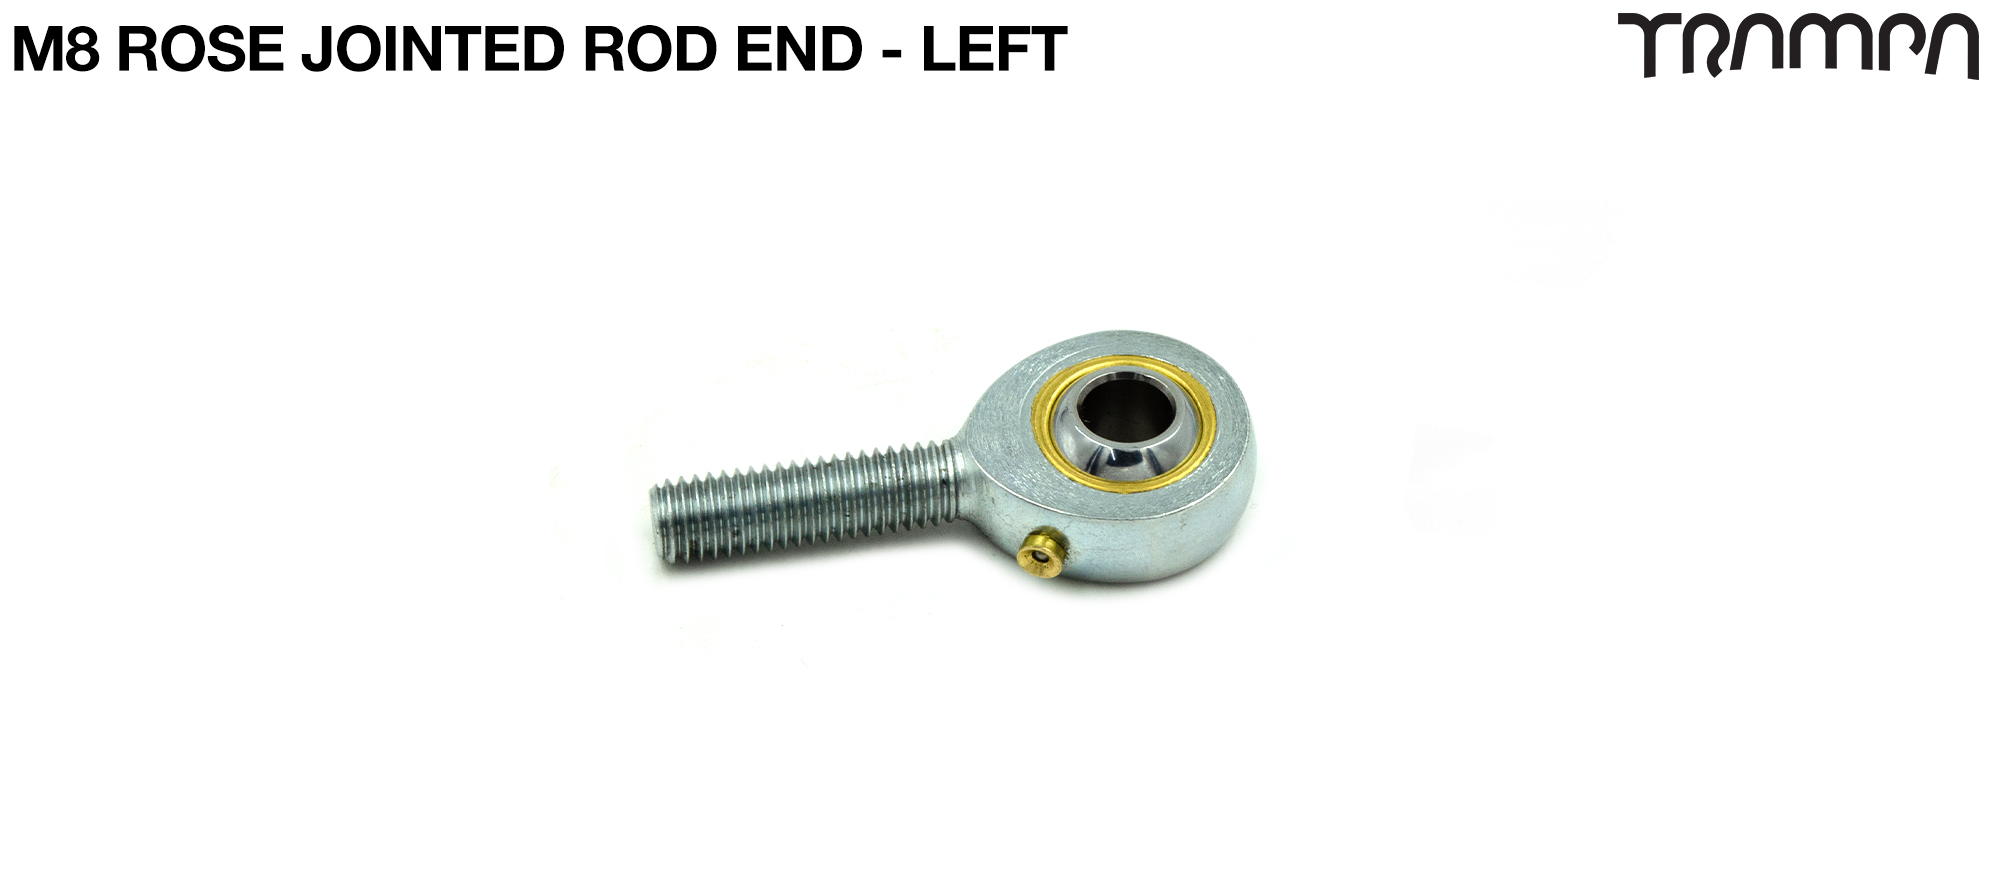 M8 Rose Jointed Rod End - LEFT